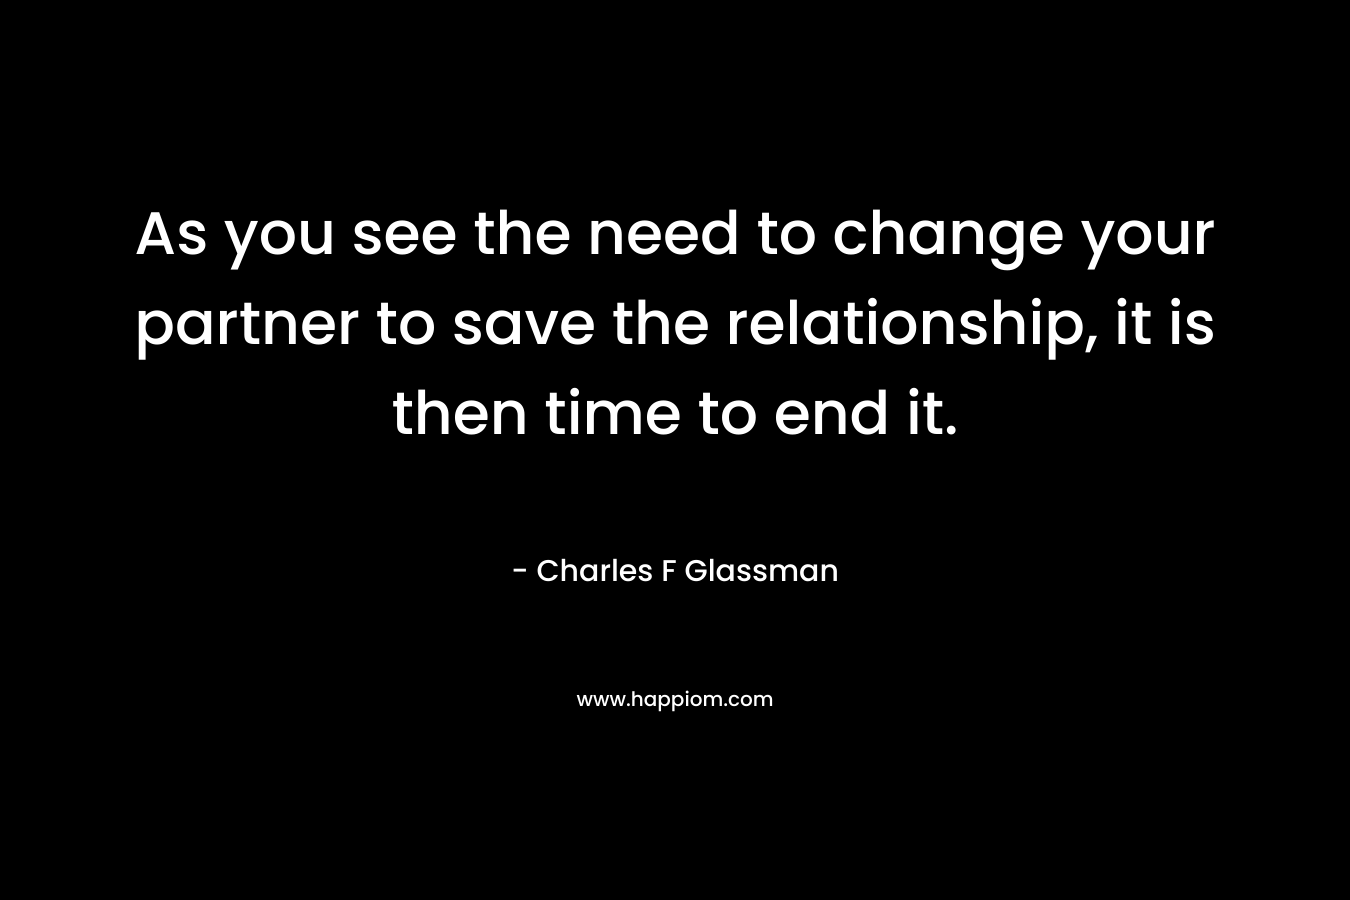 As you see the need to change your partner to save the relationship, it is then time to end it.